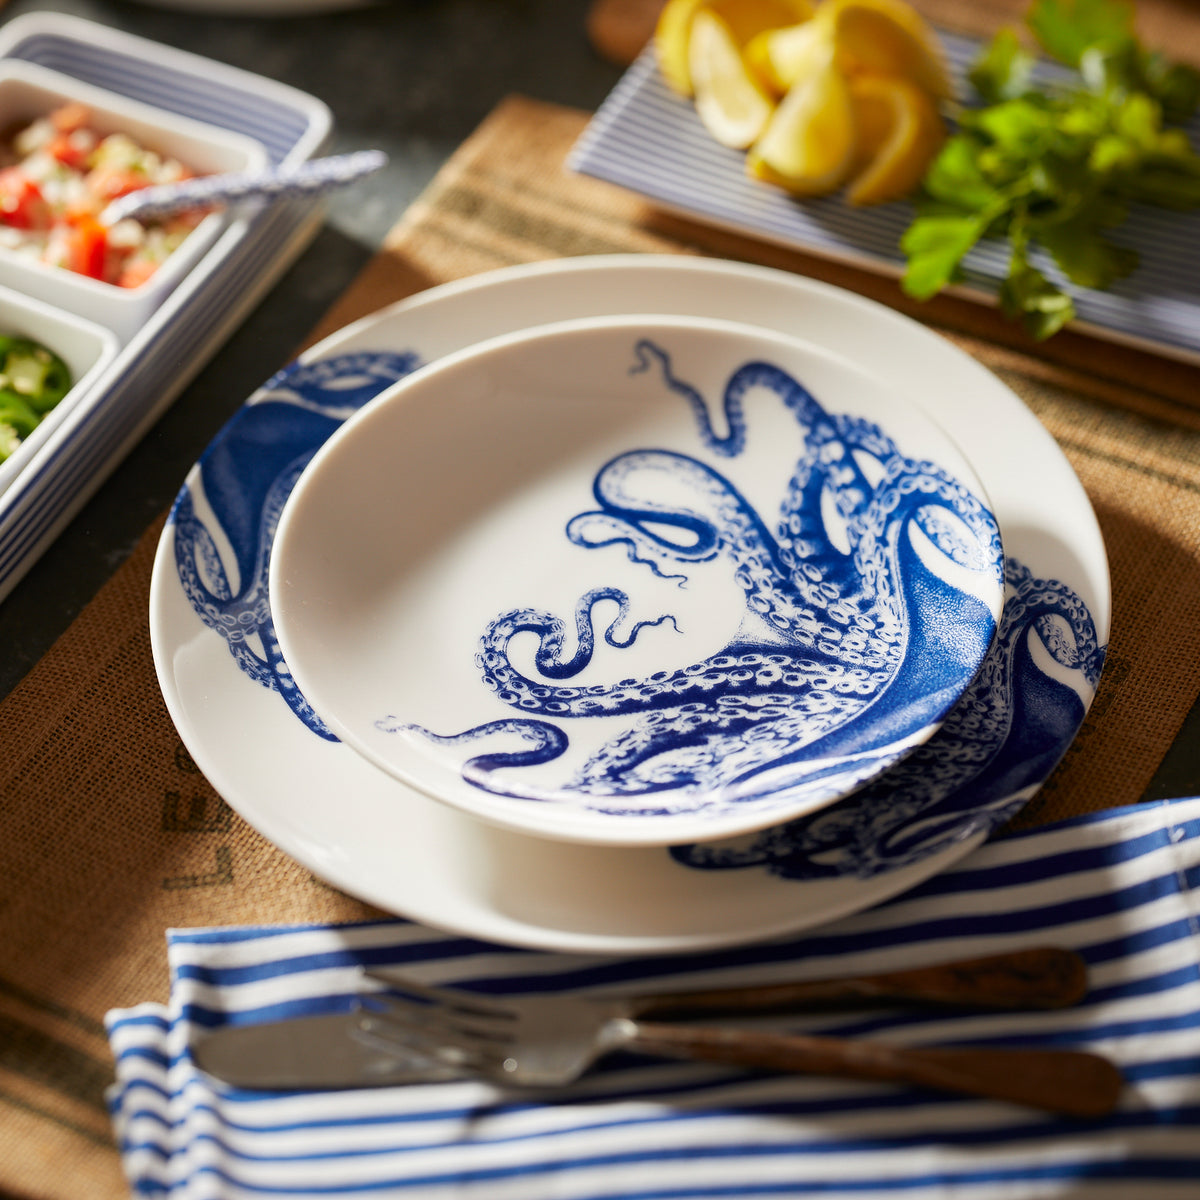 A creamy white premium porcelain Lucy Coupe Dinner Plate from Caskata Artisanal Home with a blue octopus design, named Lucy the octopus, rests on a matching bowl. The setting features a blue striped napkin, silverware, and a dish of lemons and herbs in the background.